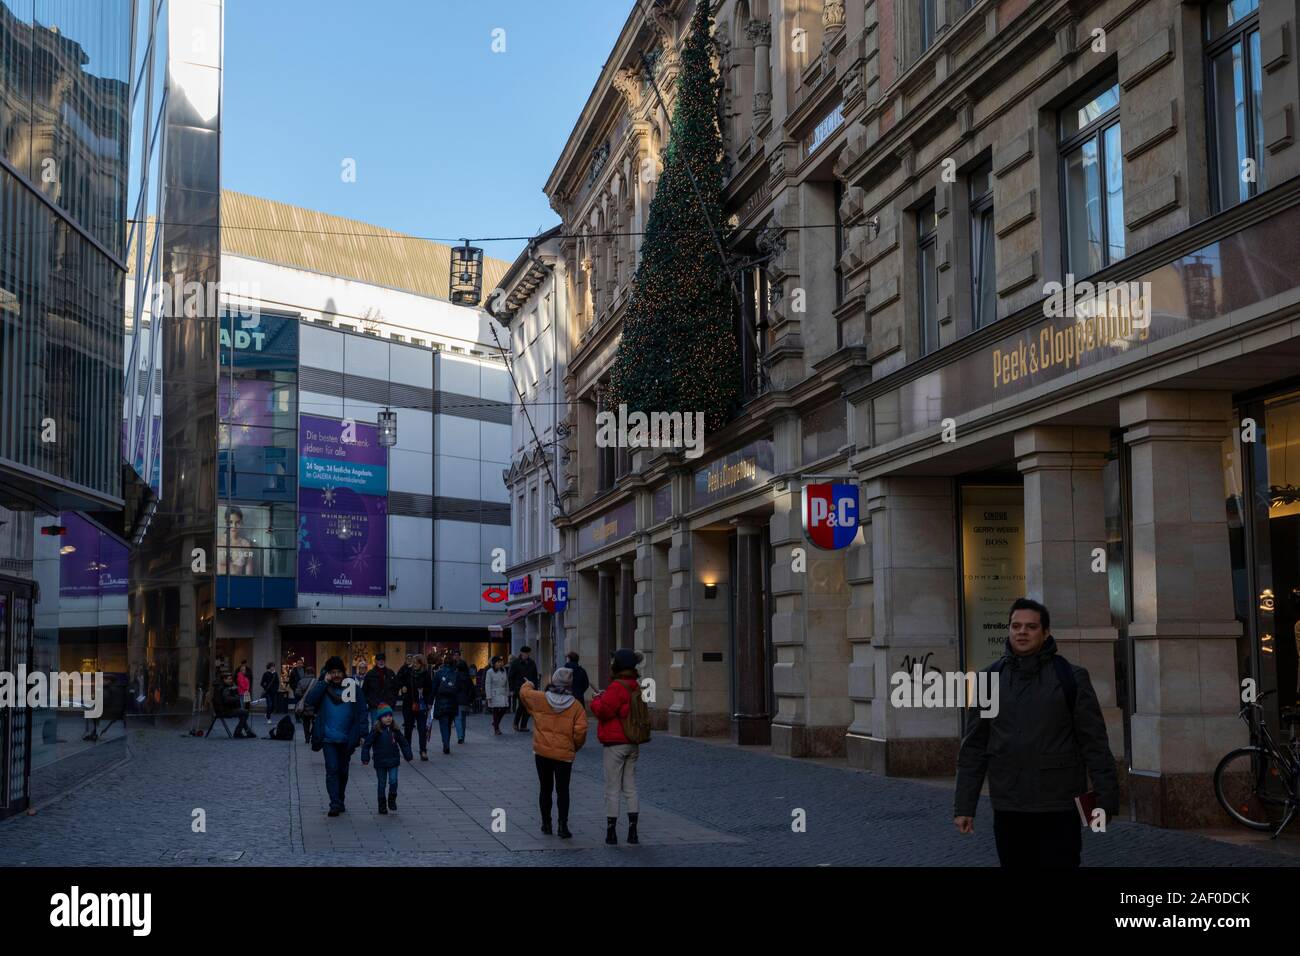 City of Braunschweig is getting ready for holiday season Stock Photo